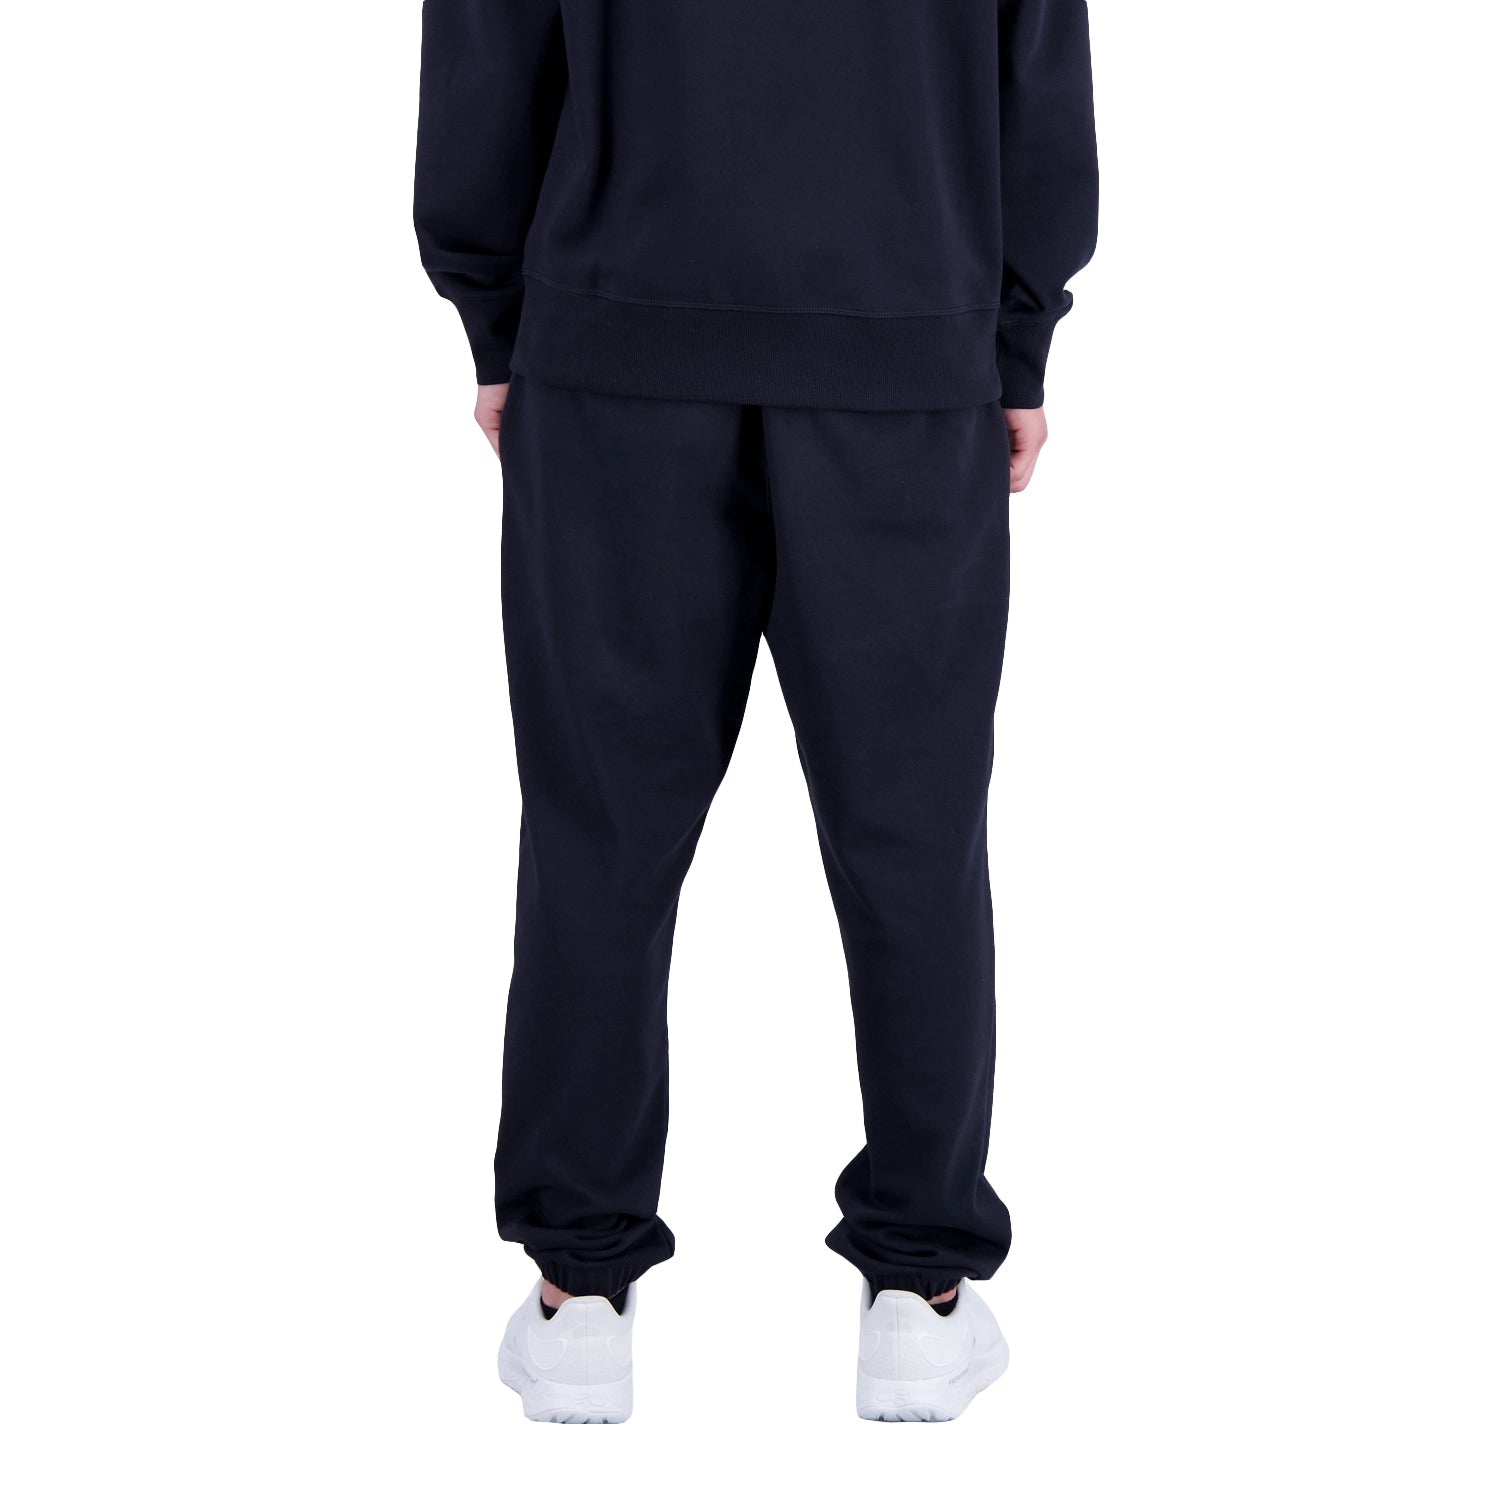 New Balance Men Essentials Stacked Logo French Terry Sweatpant Black  MP31539-BLK ()